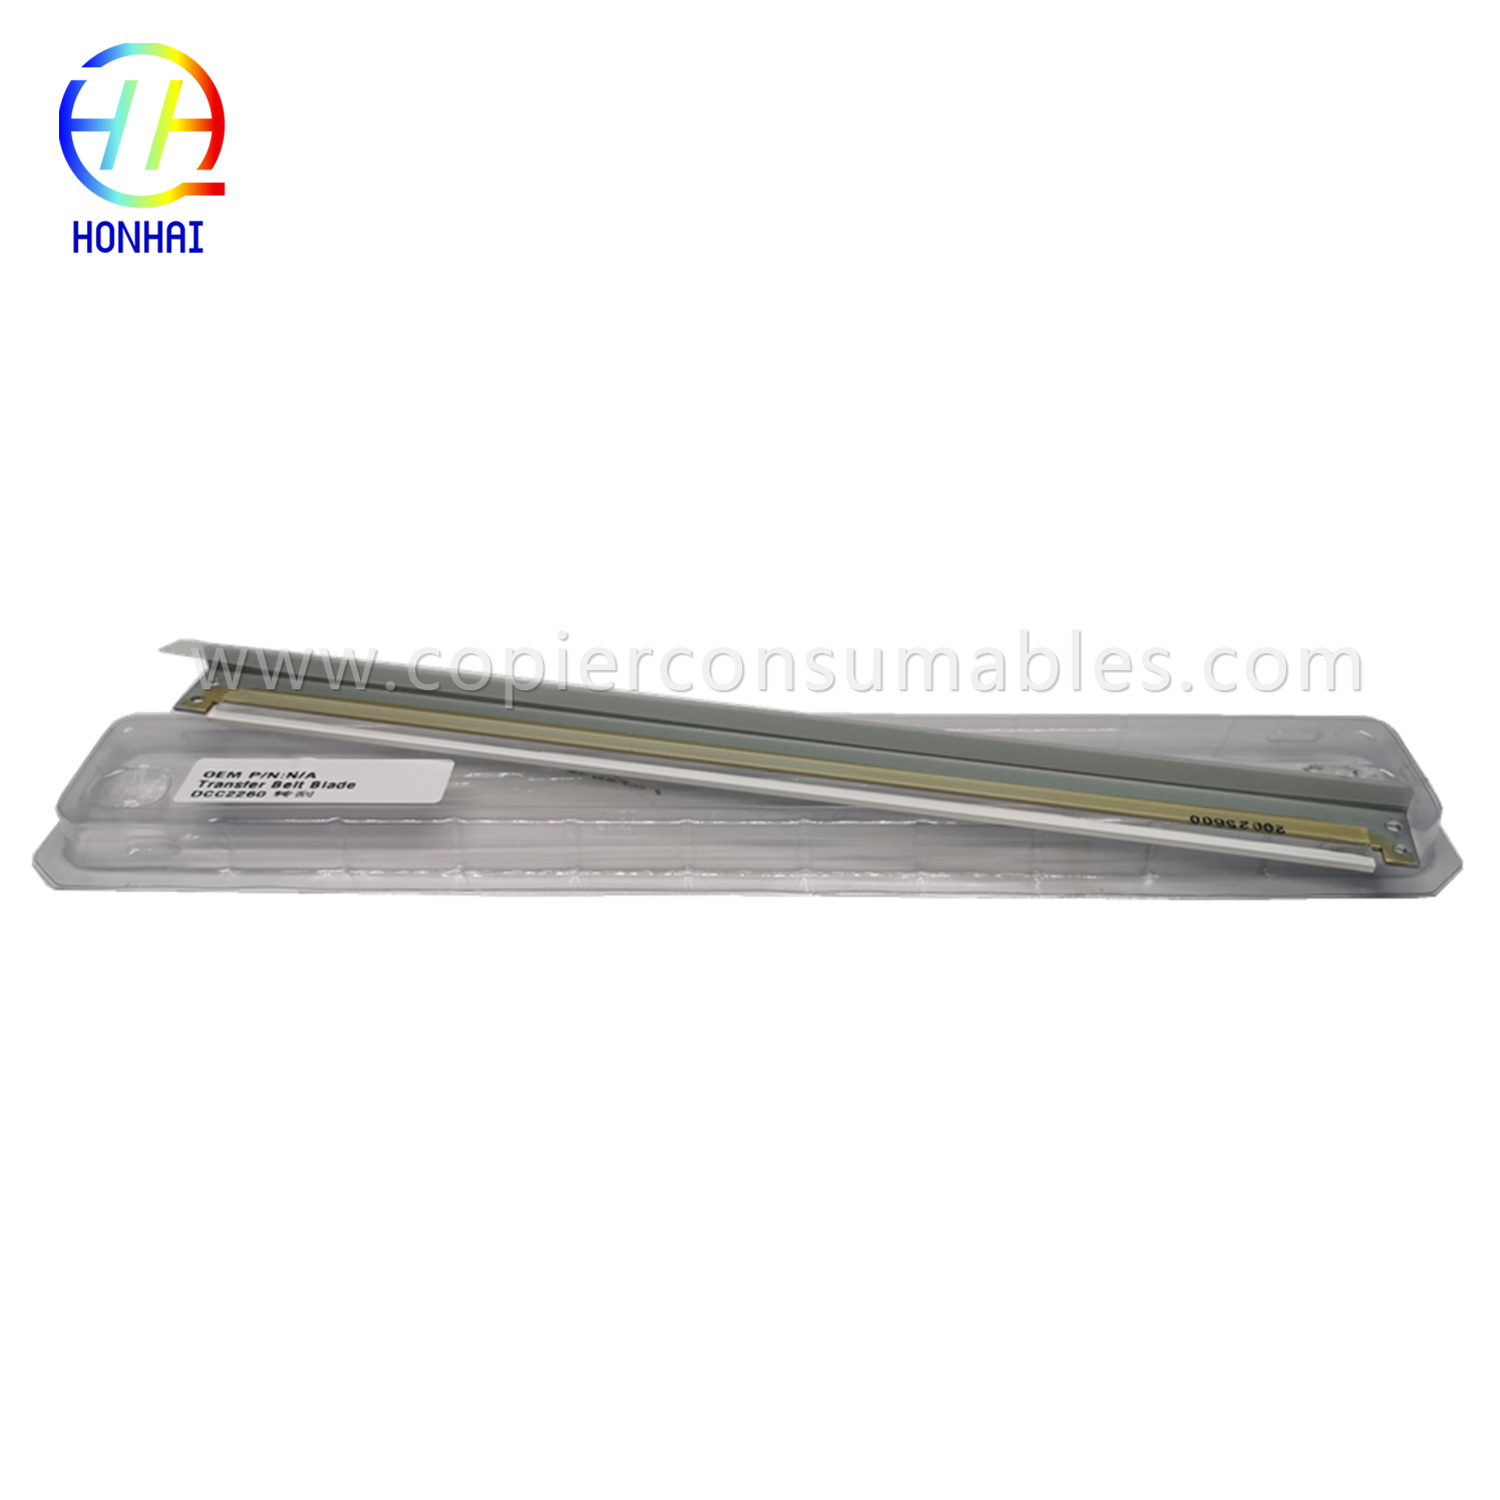 Transfer Cleaning Blade for Xerox Docucentre-IV C2260 C2263 C2265 Workcentre 7120 7125 7220 7225  (2)